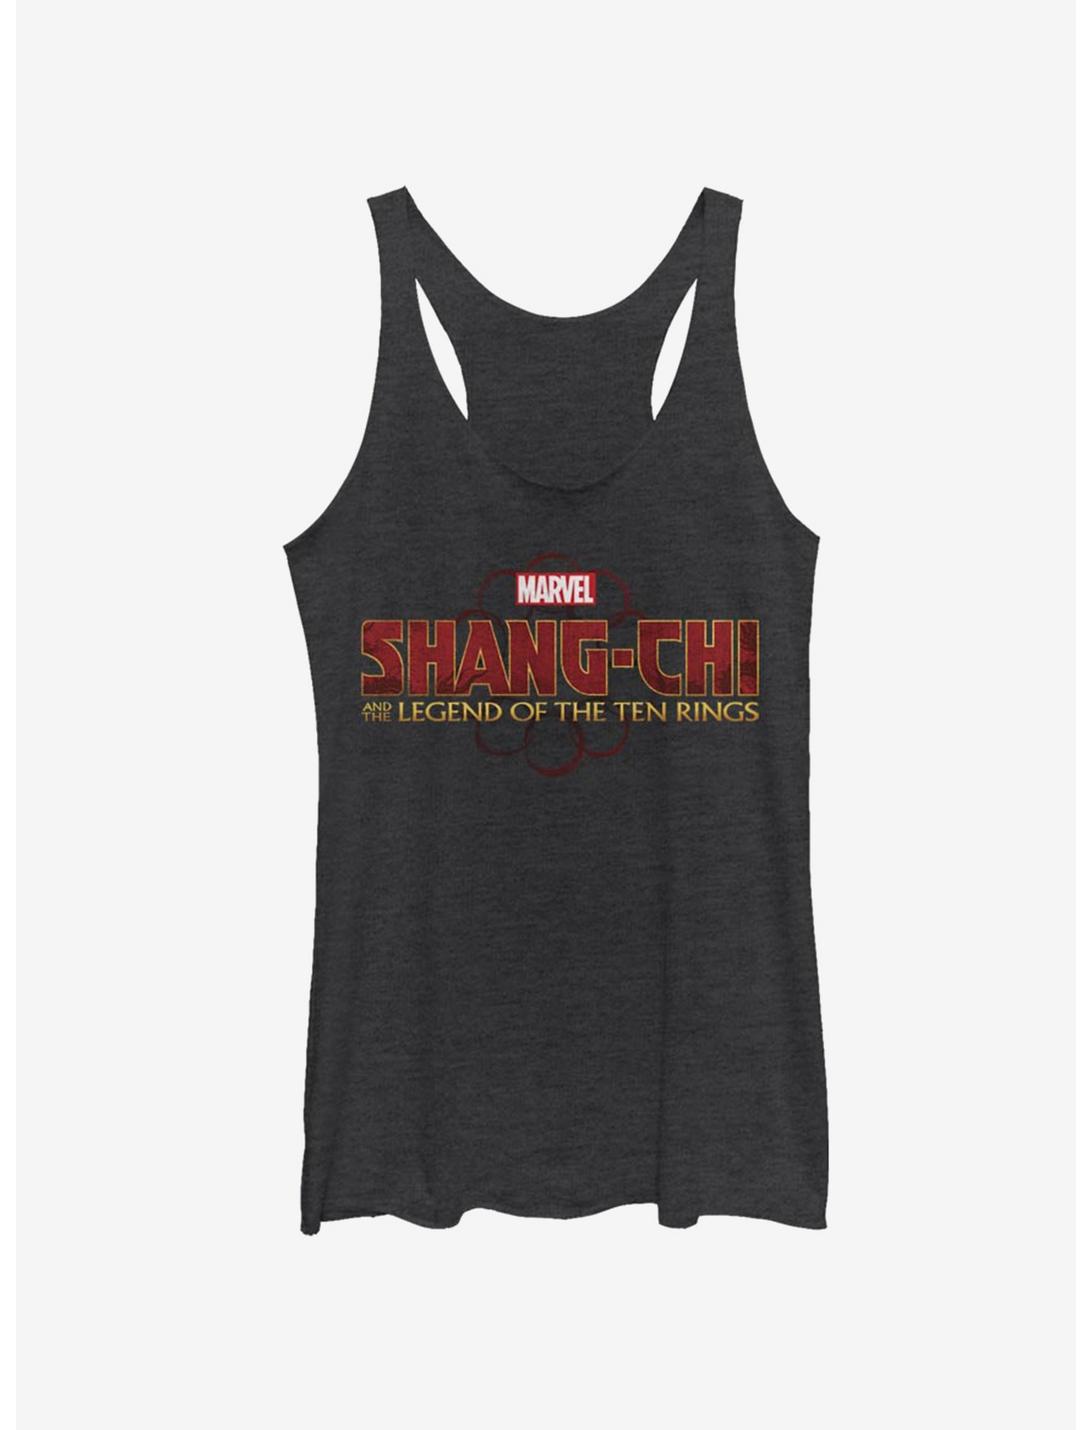 Marvel Shang-Chi And The Legend Of The Ten Rings Womens Tank Top, BLK HTR, hi-res